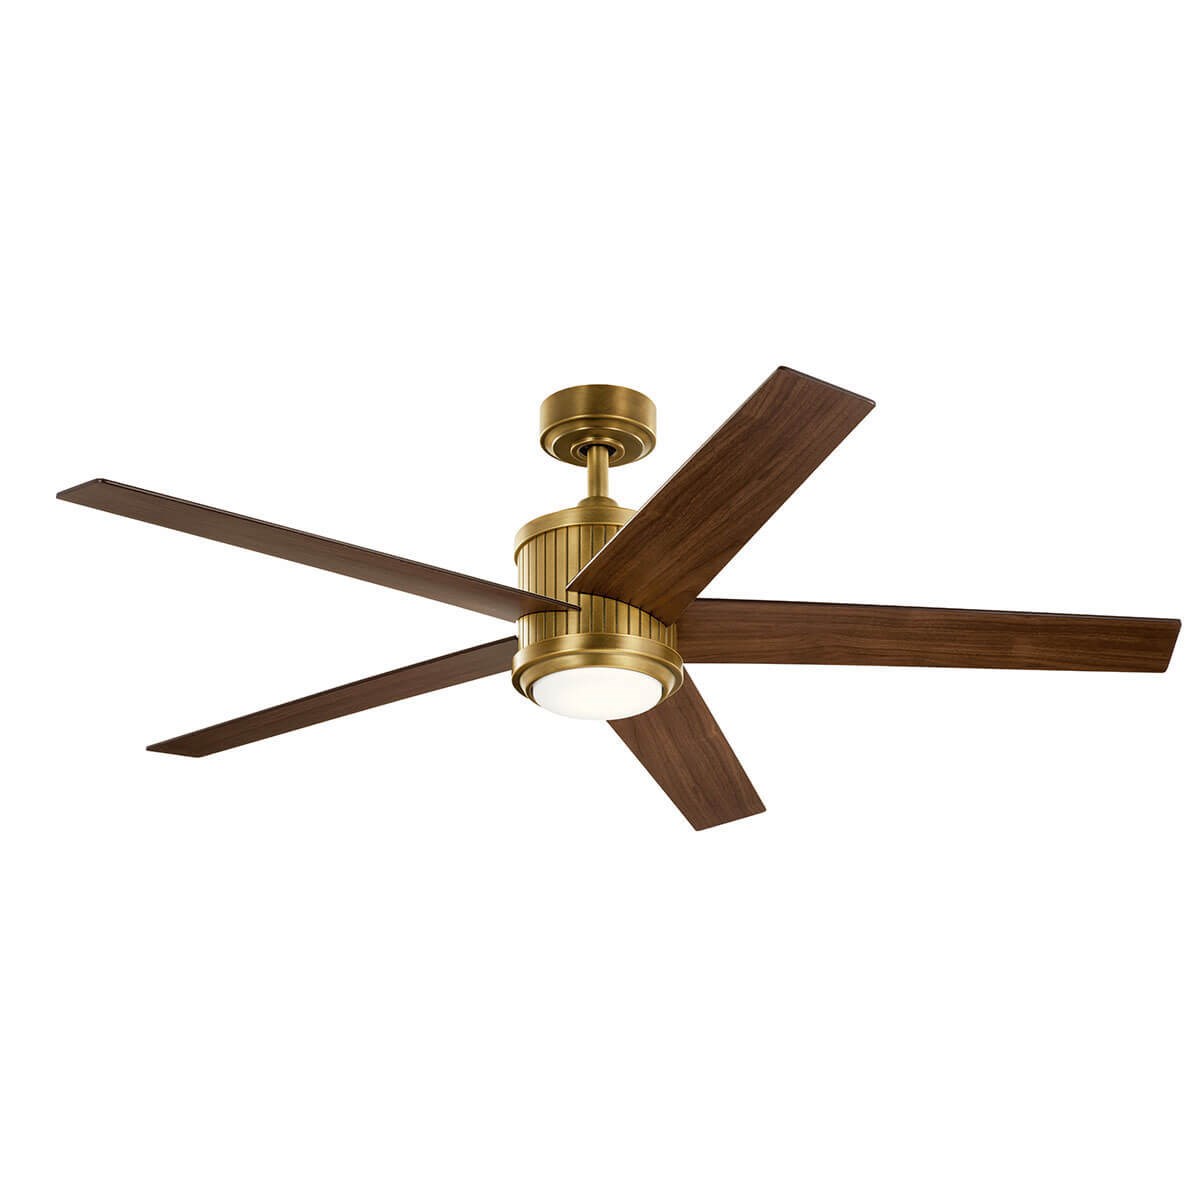 MDA Lites Brahm™ LED 56" Ceiling Fan Natural Brass  $359* *USD shown. Retailer price may vary. 300044NBR